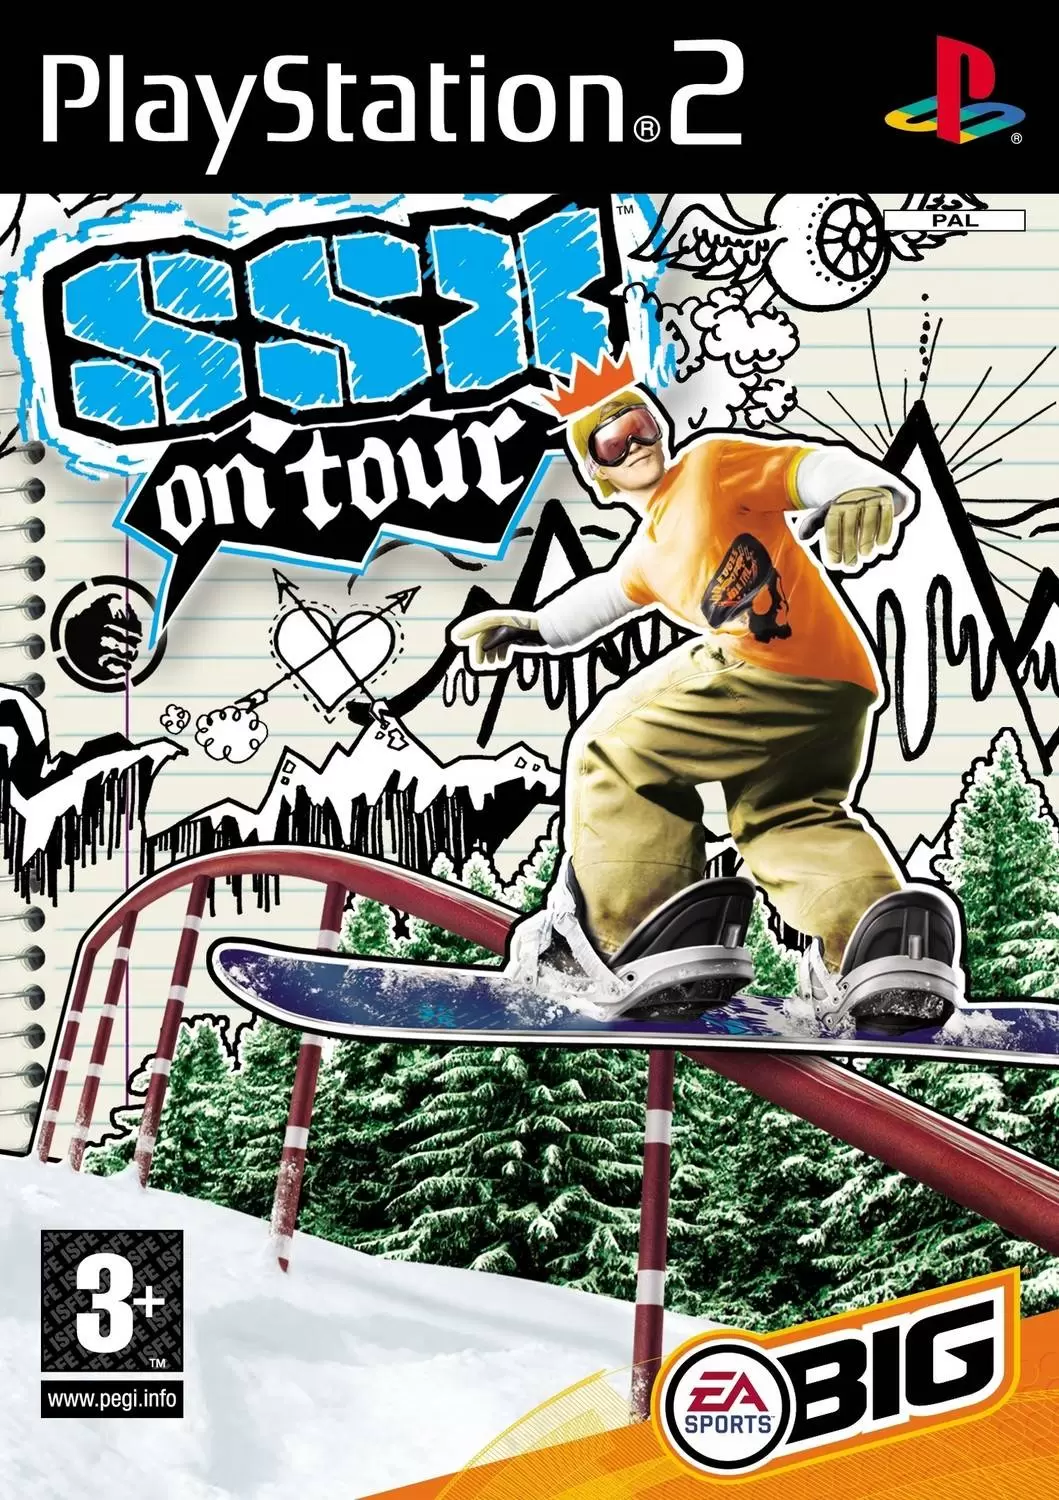 PS2 Games - SSX on Tour